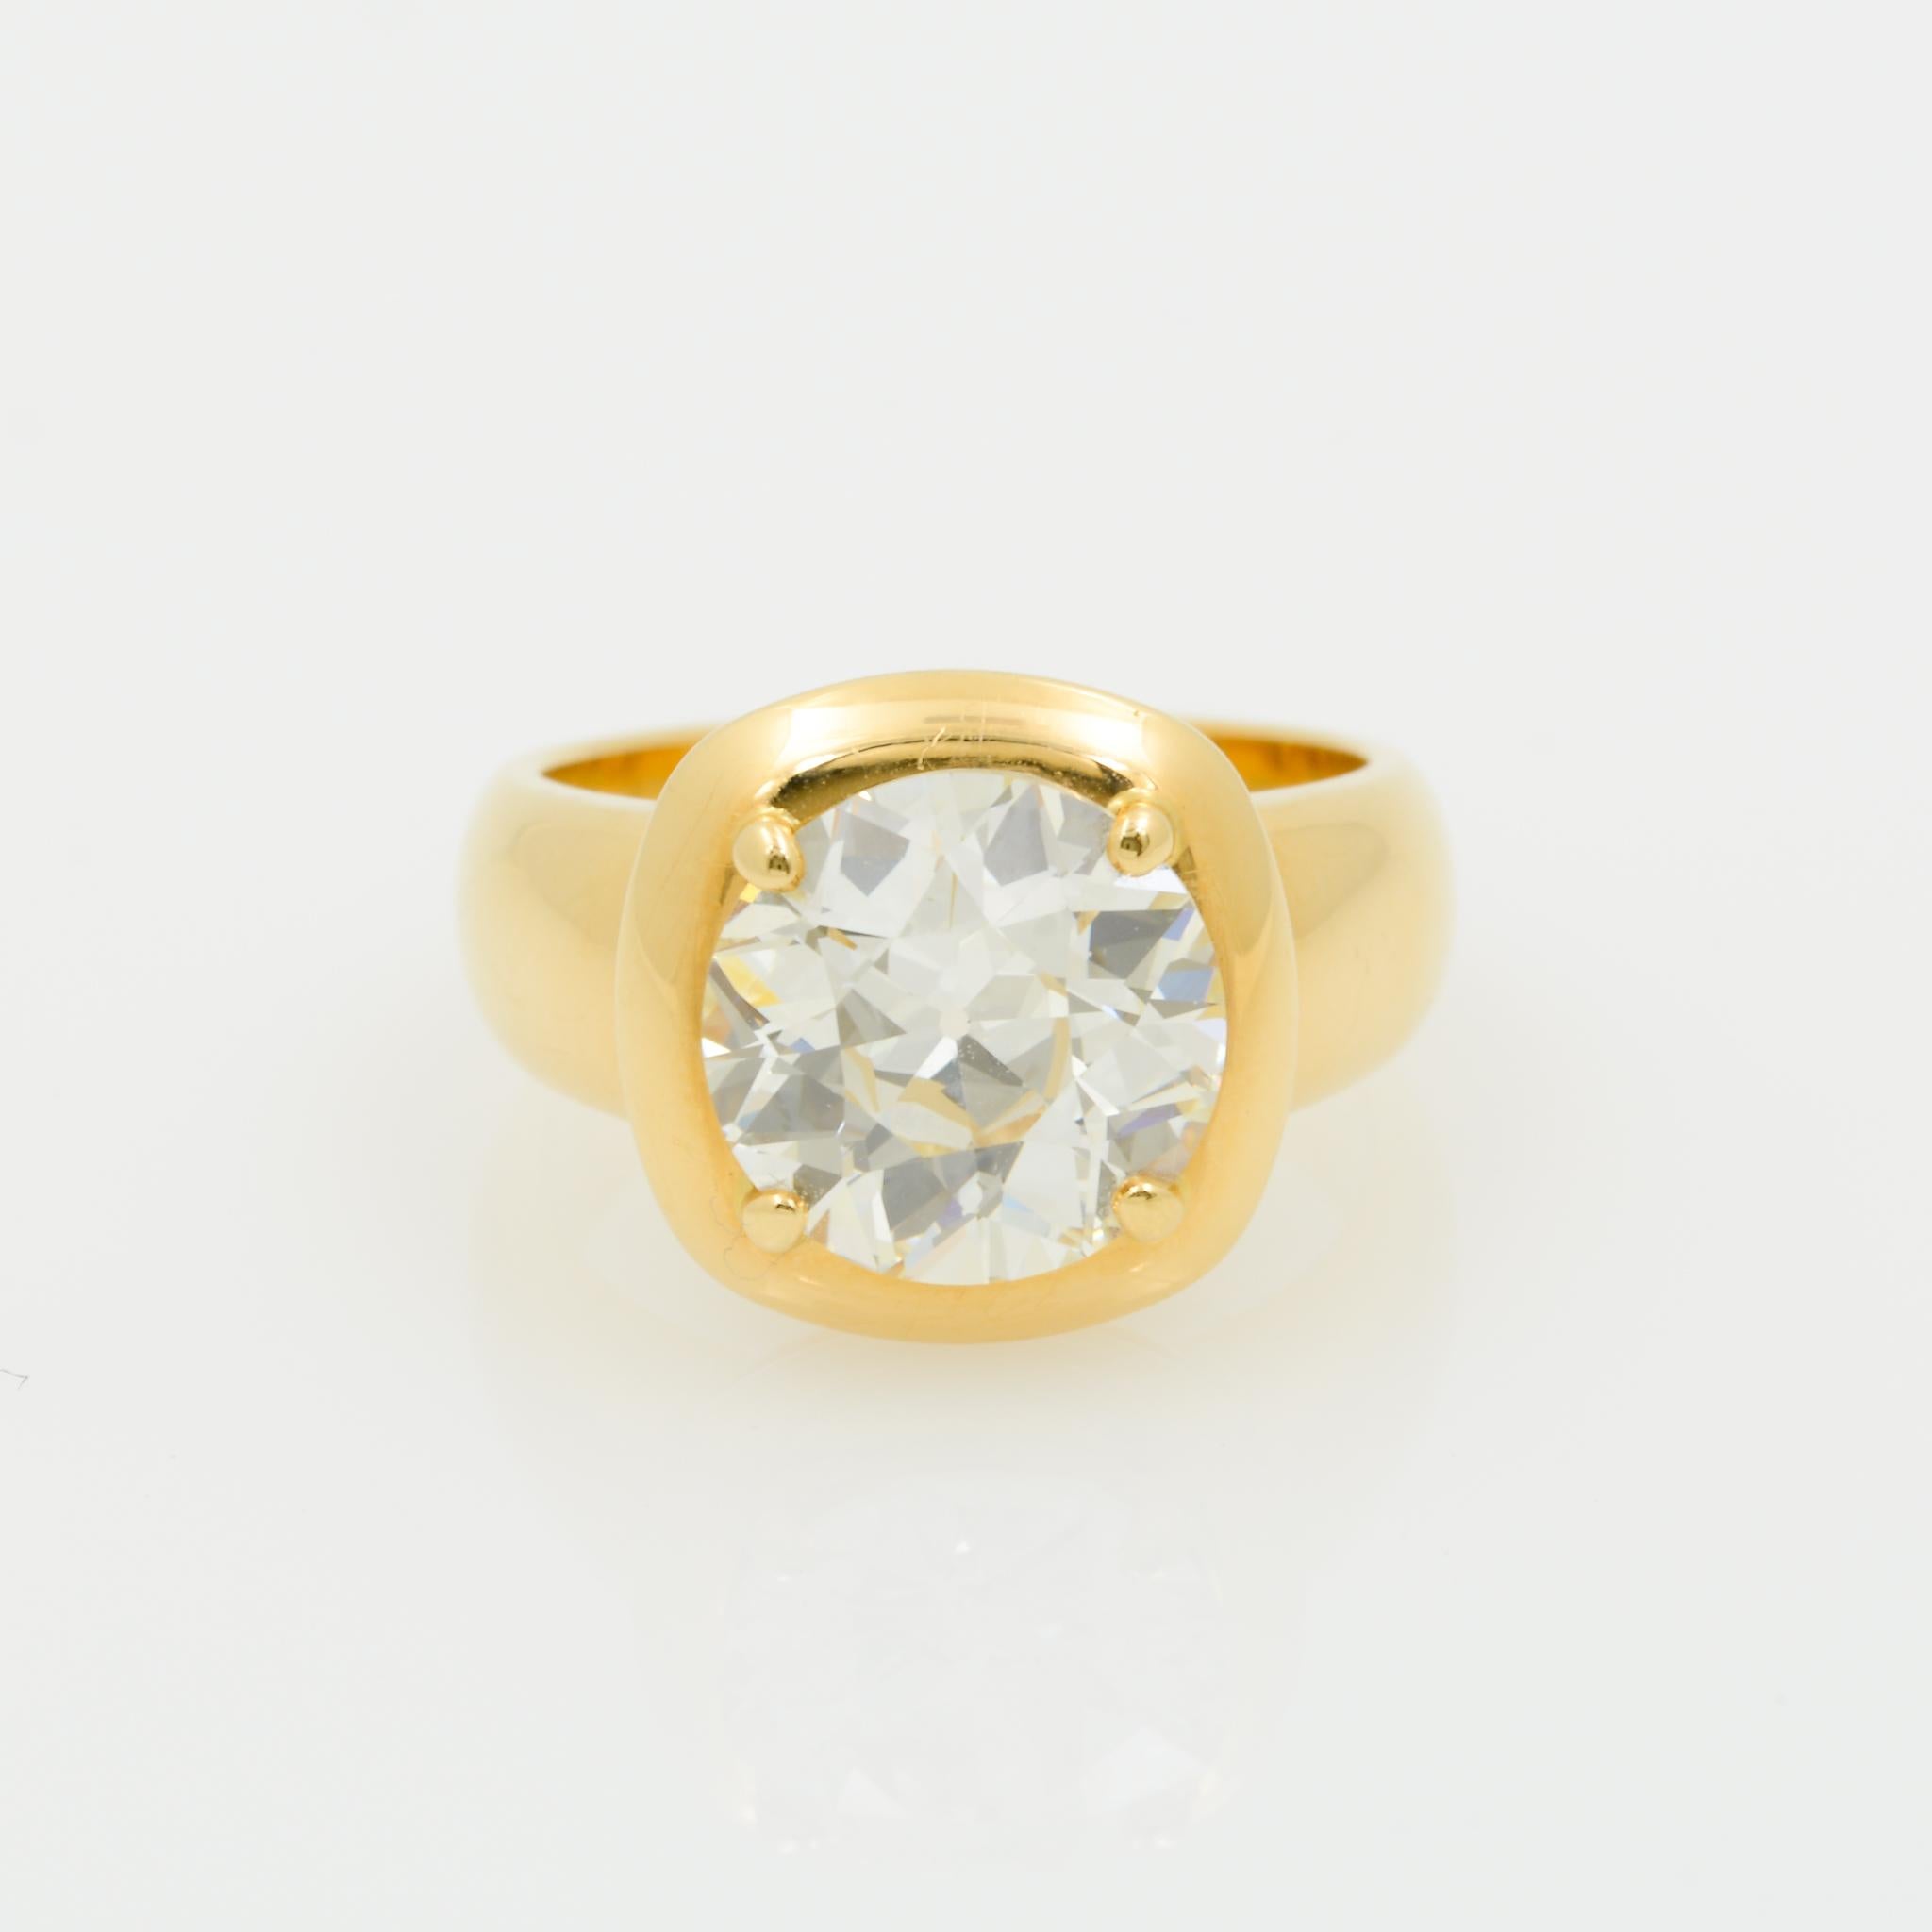 By Single Stone, the Cori ring features a GIA certified 3.85 carat old European cut diamond with N coloring and VS1 clarity. This vintage diamond is set in 18 karat yellow gold with a tapered shank. The ring is a size 6.